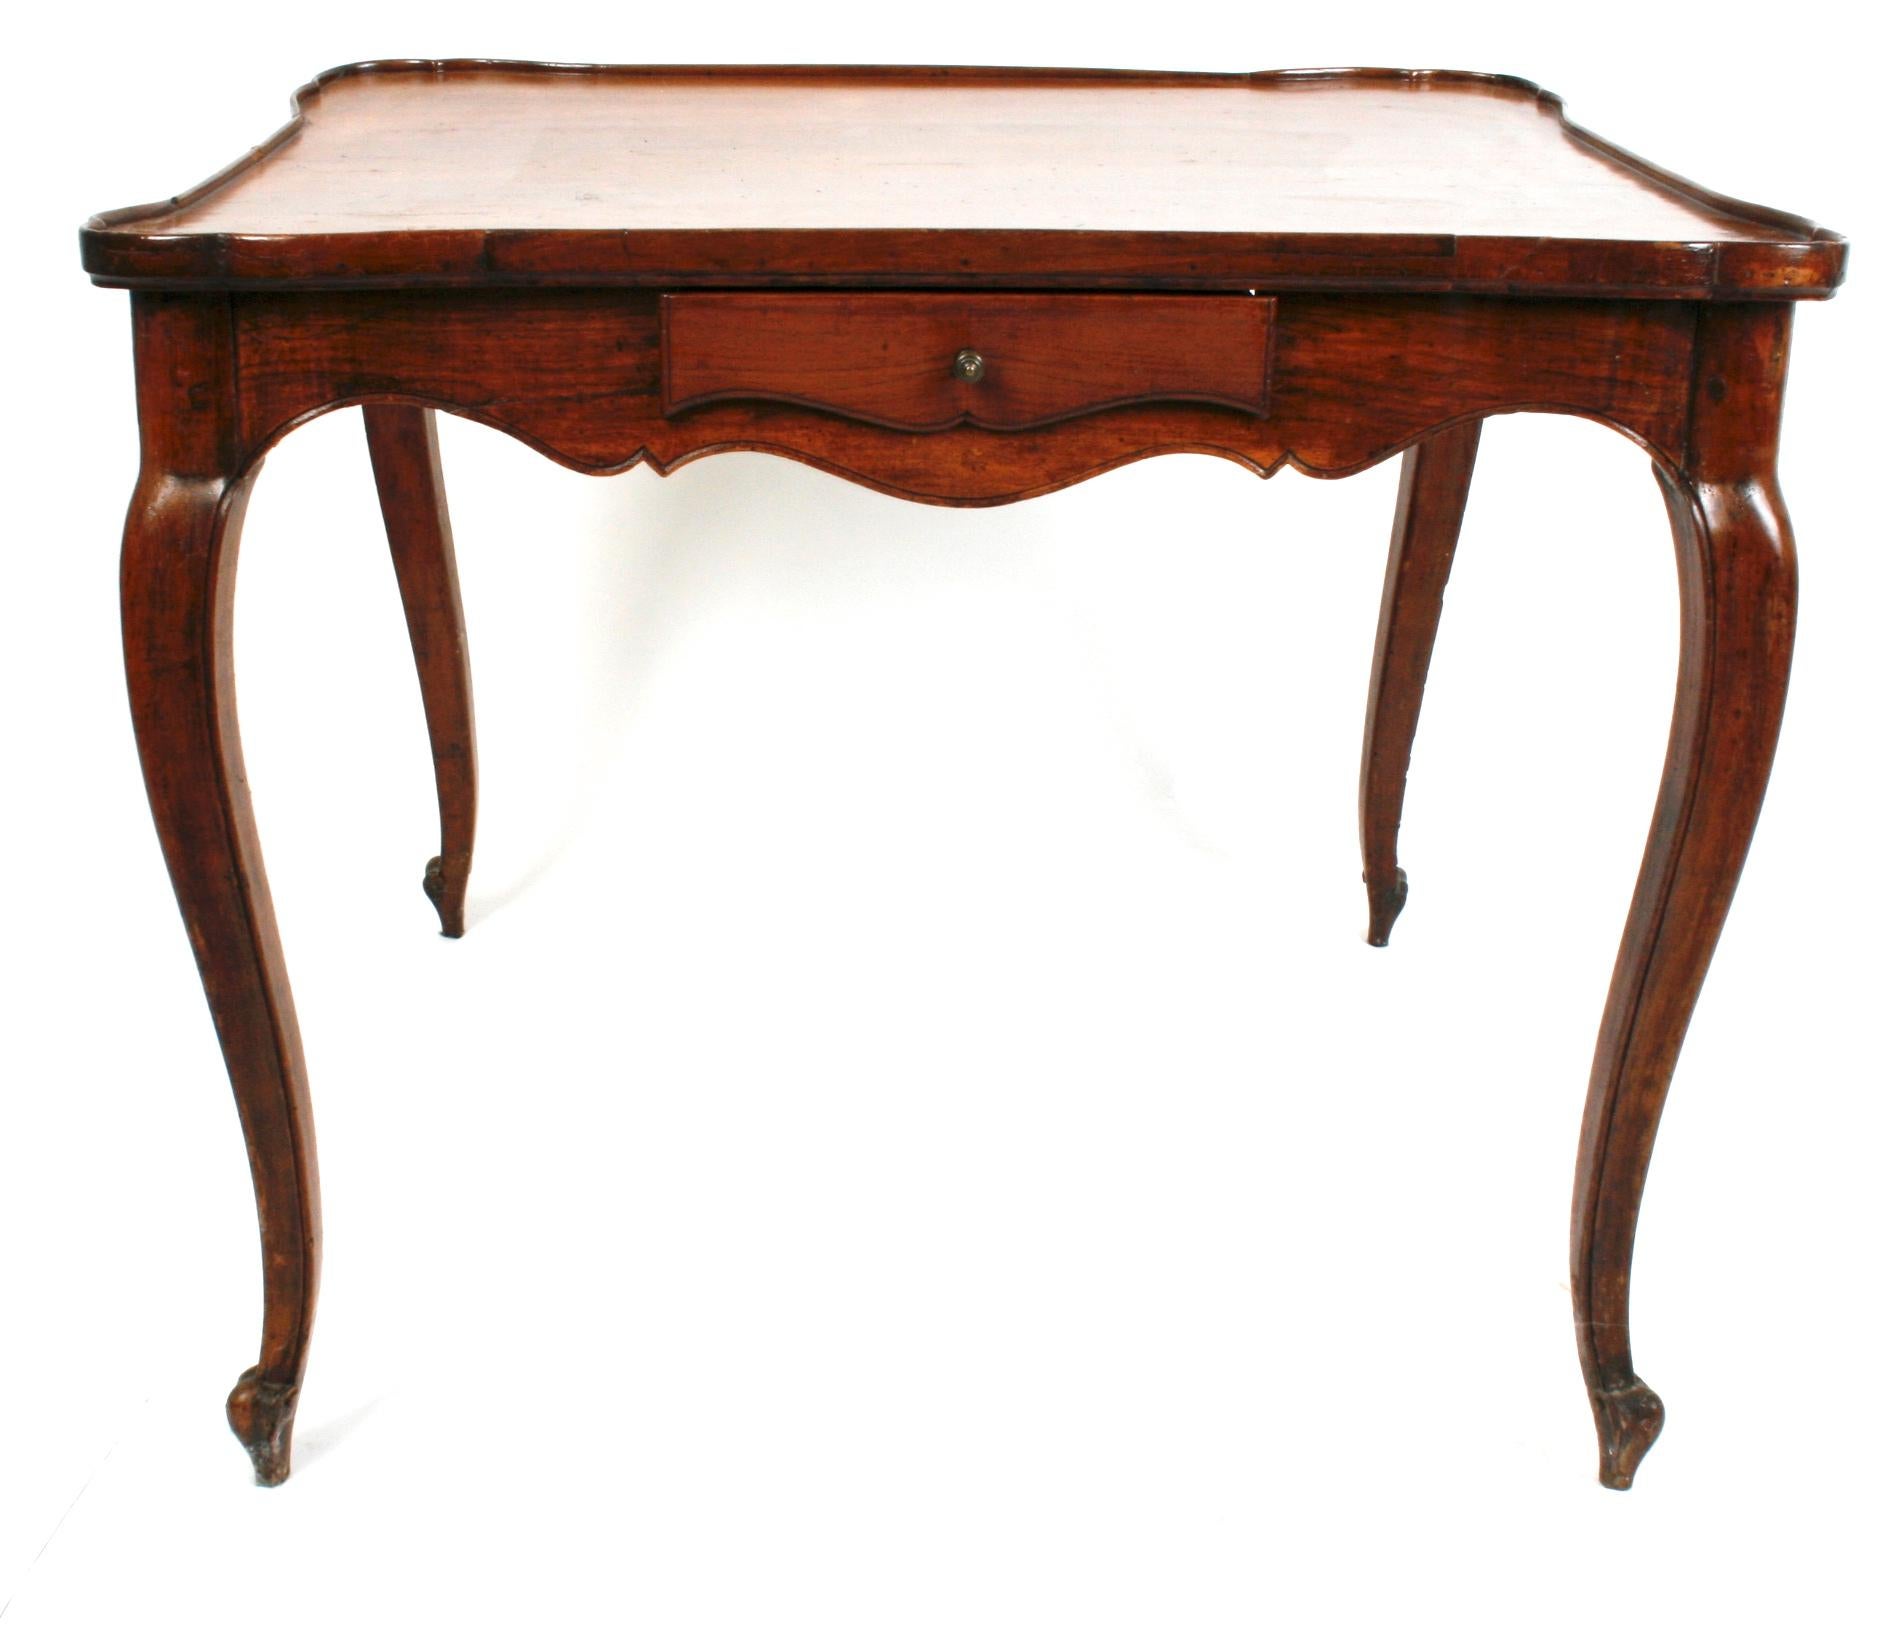 Louis XV walnut table with galleried top, circa 1780. The table has a scalloped apron, a scalloped drawer on each side, and cabriolet legs that end with scrolled feet. 
N.P. Trent has been a respected name in antiques for over 30 years with a large